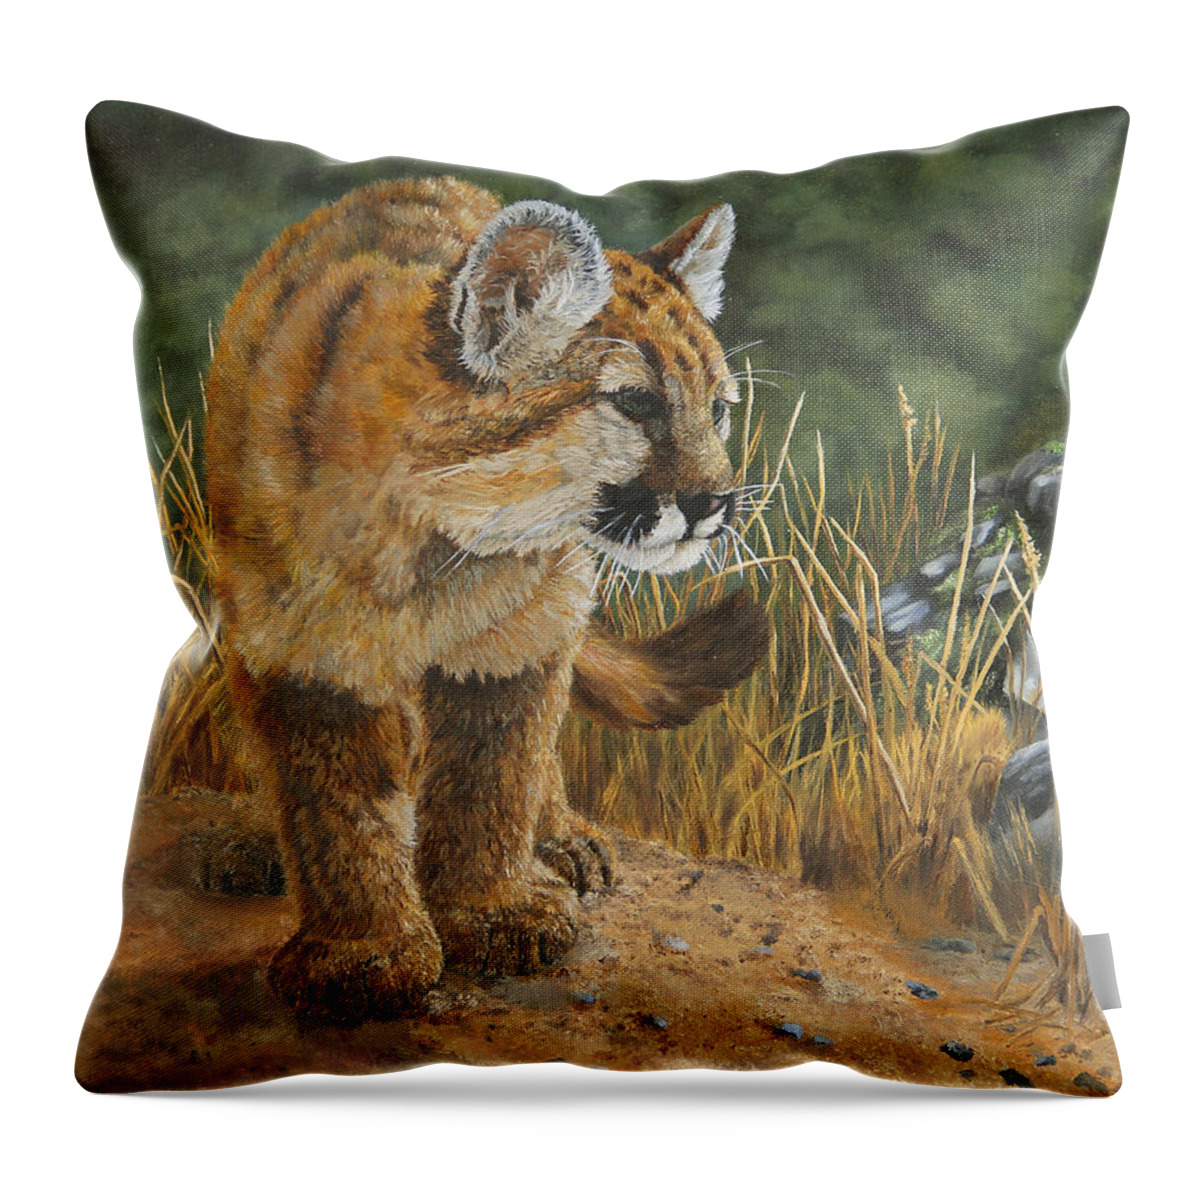 North American Wildlife Throw Pillow featuring the painting New Adventures - Cougar Cub by Johanna Lerwick